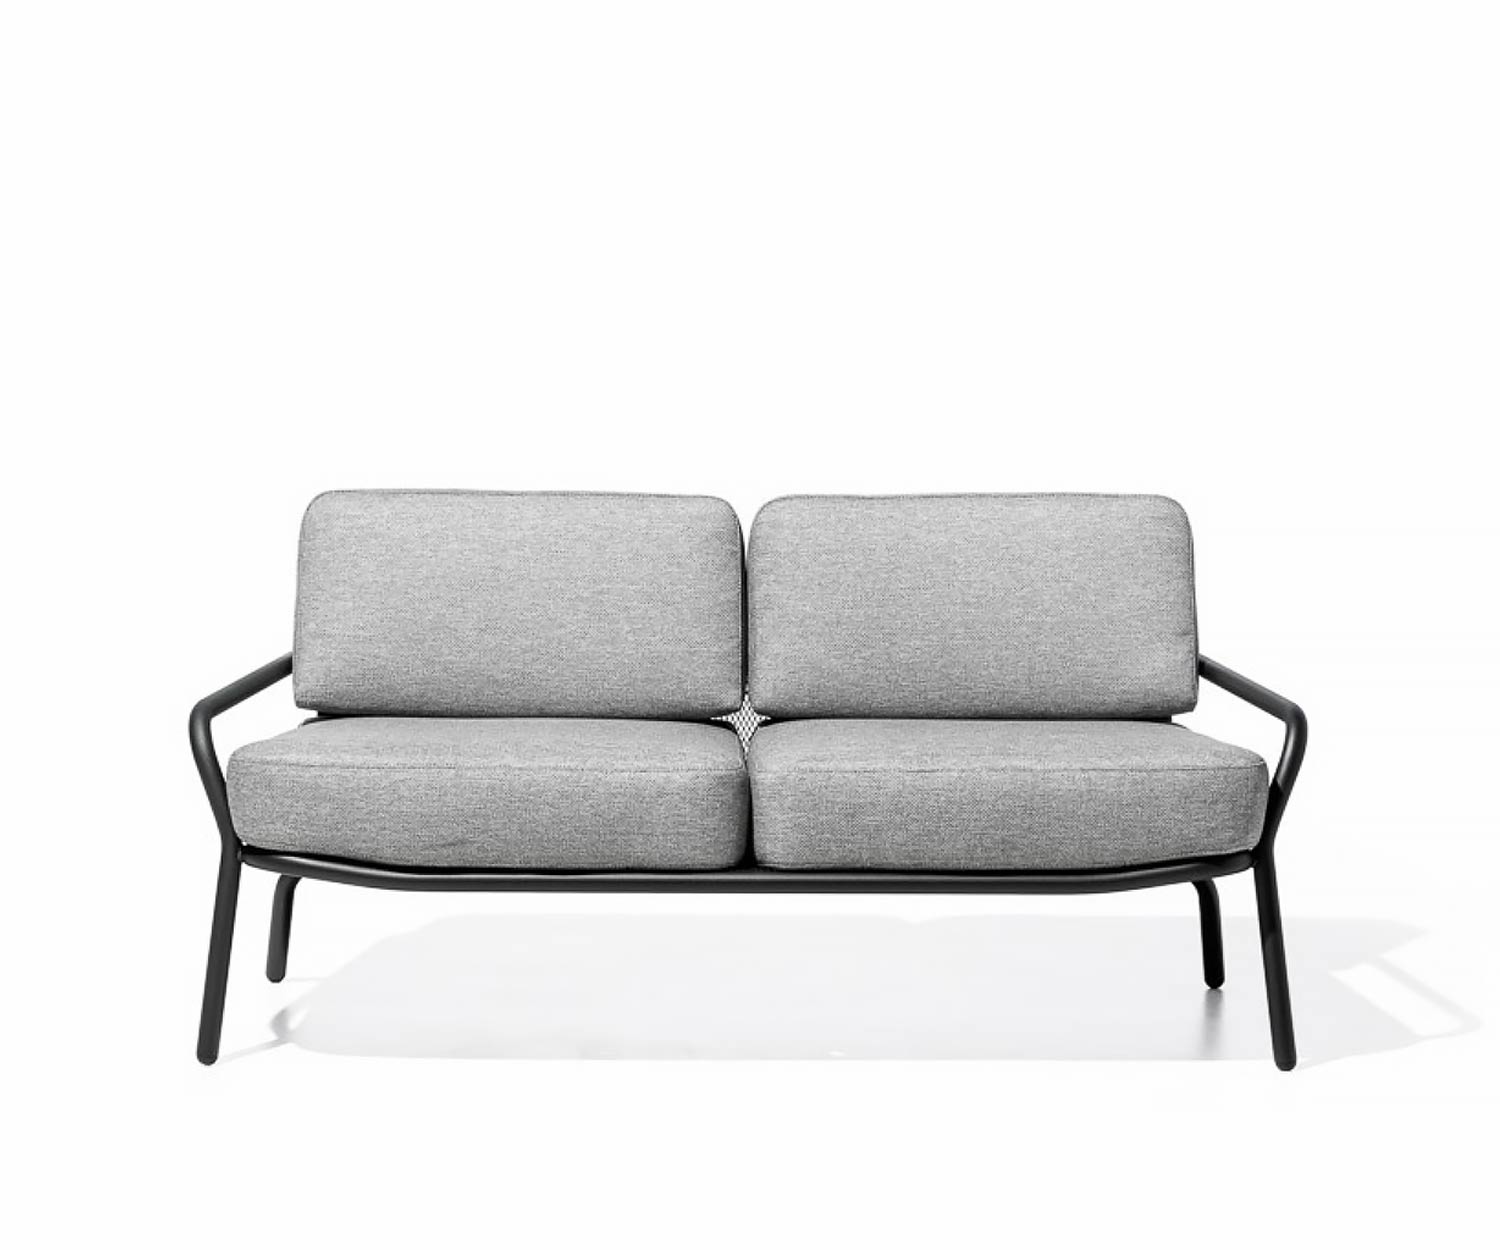 Exclusive Todus Starling design lounge sofa with white fabric cover as 2-seater